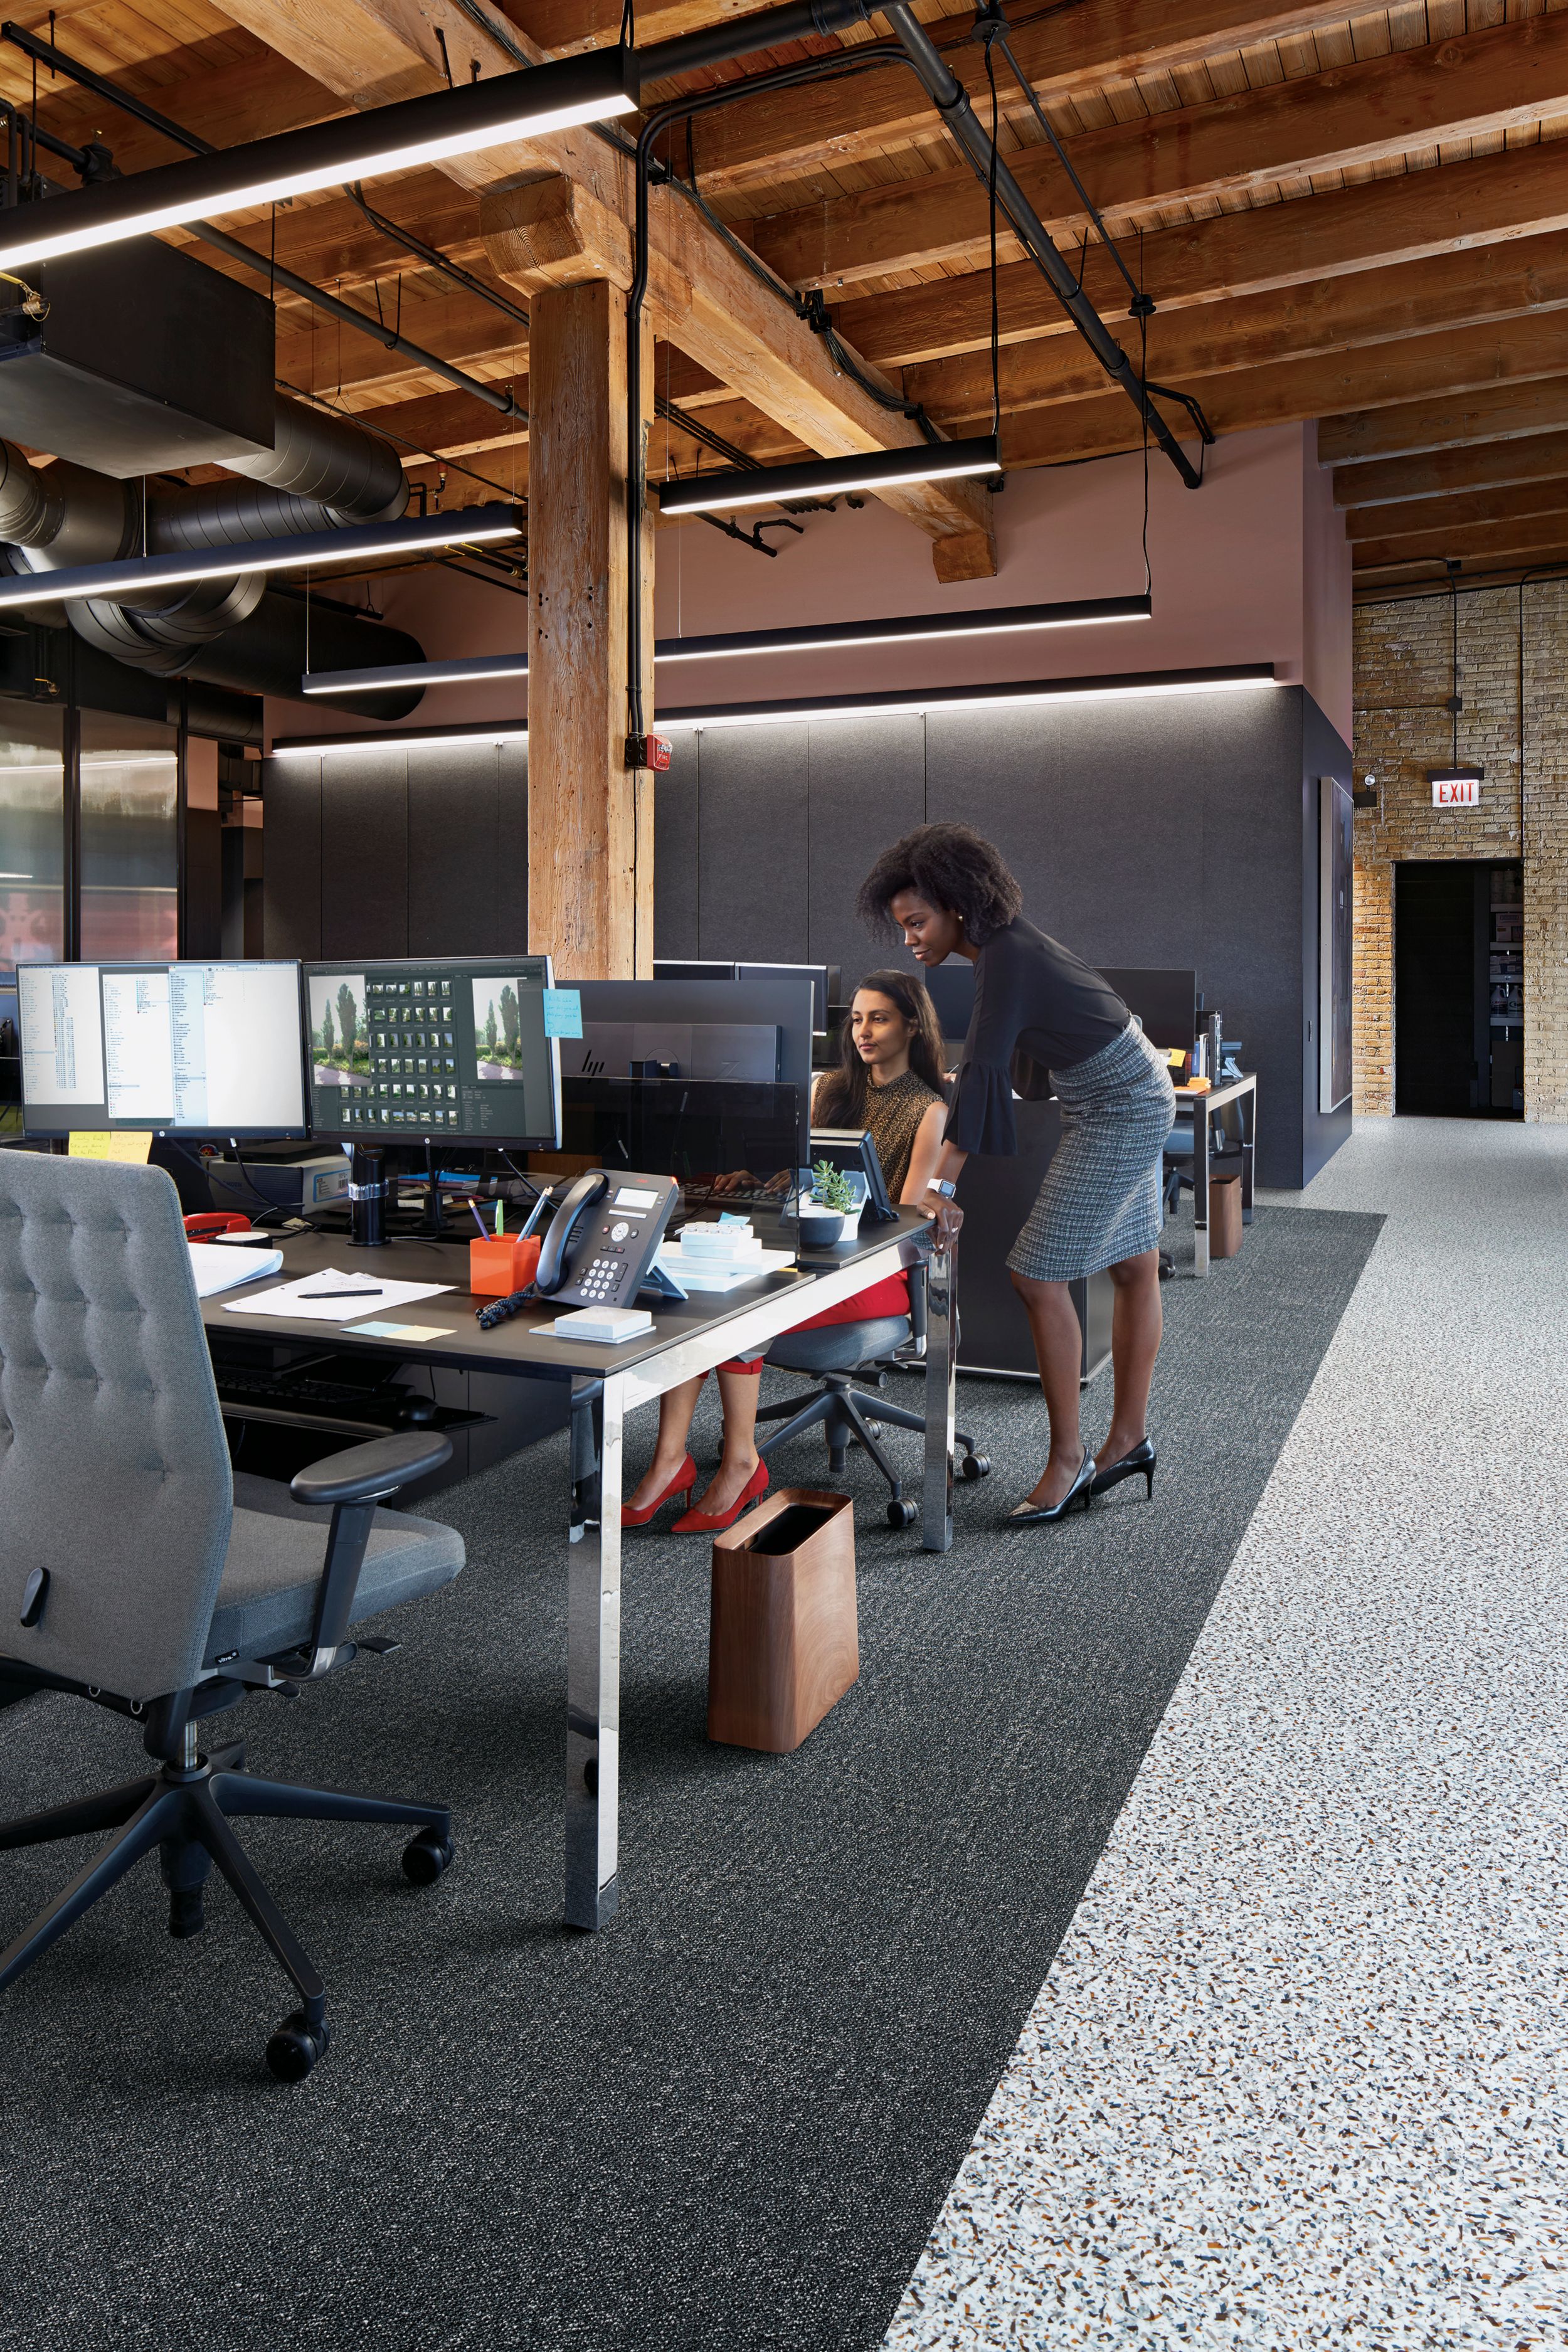 Interface Step it Up and Walk on By carpet tile in common work space with two people imagen número 8